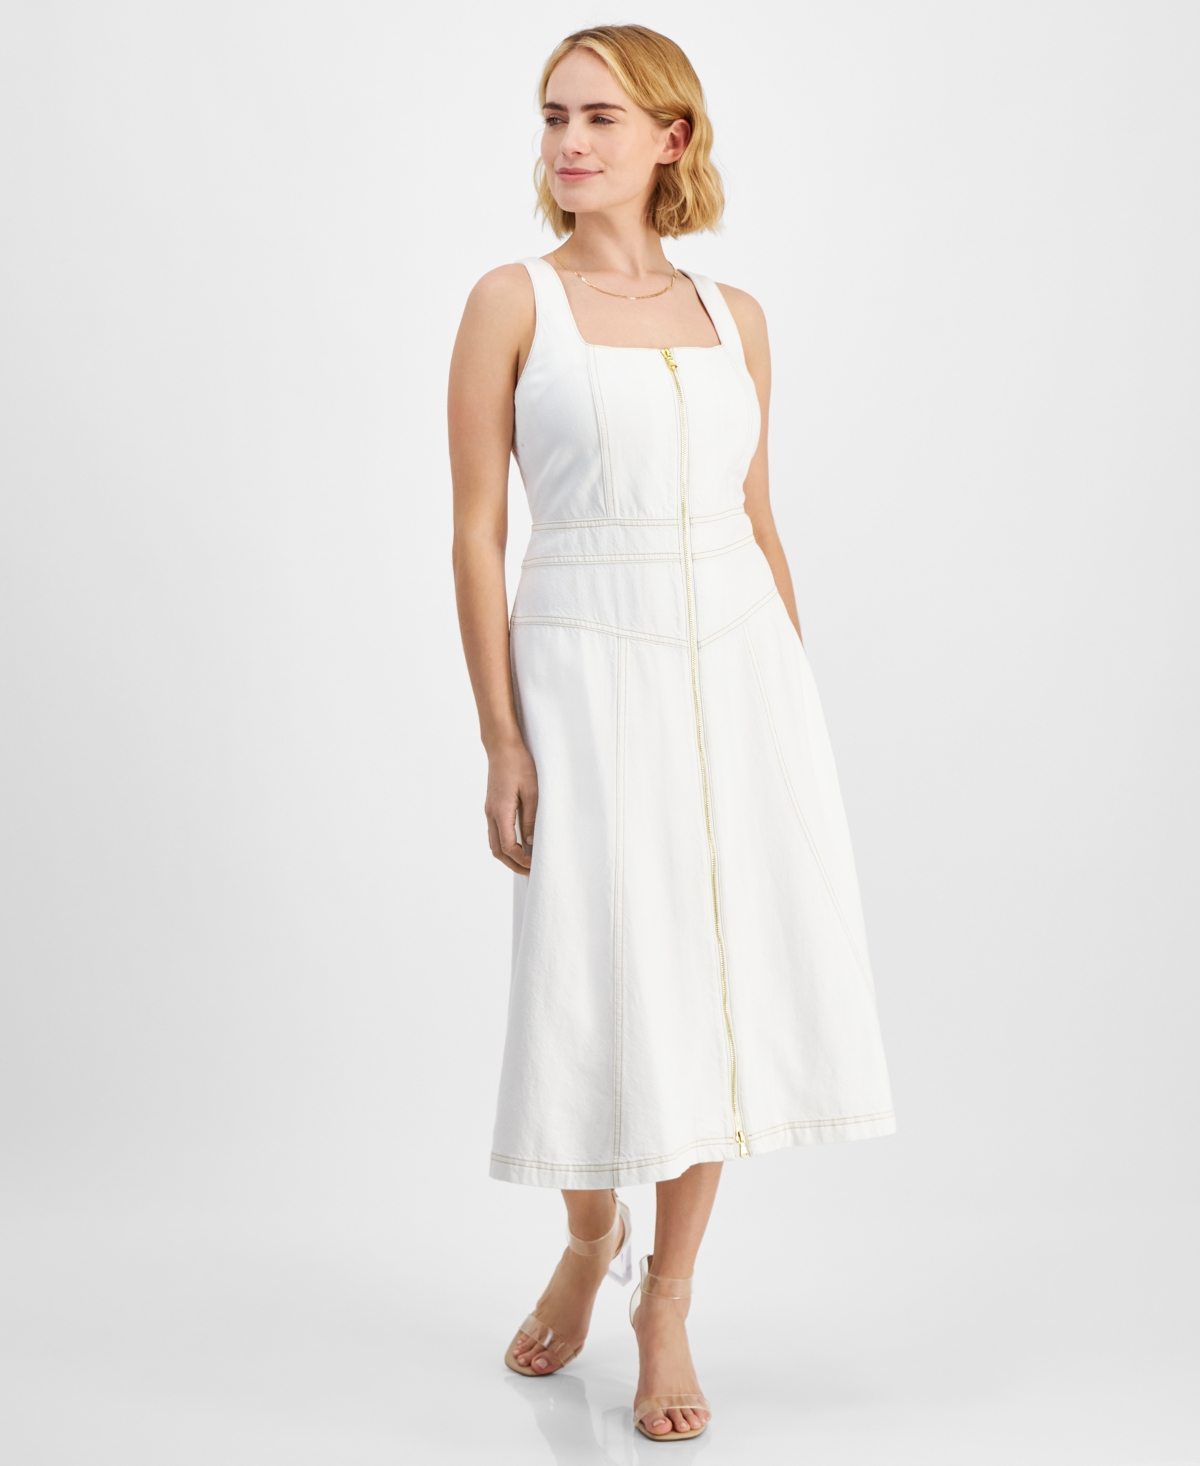 Petite Zippered-Front Denim Dress, Created for Macy's - Washed White